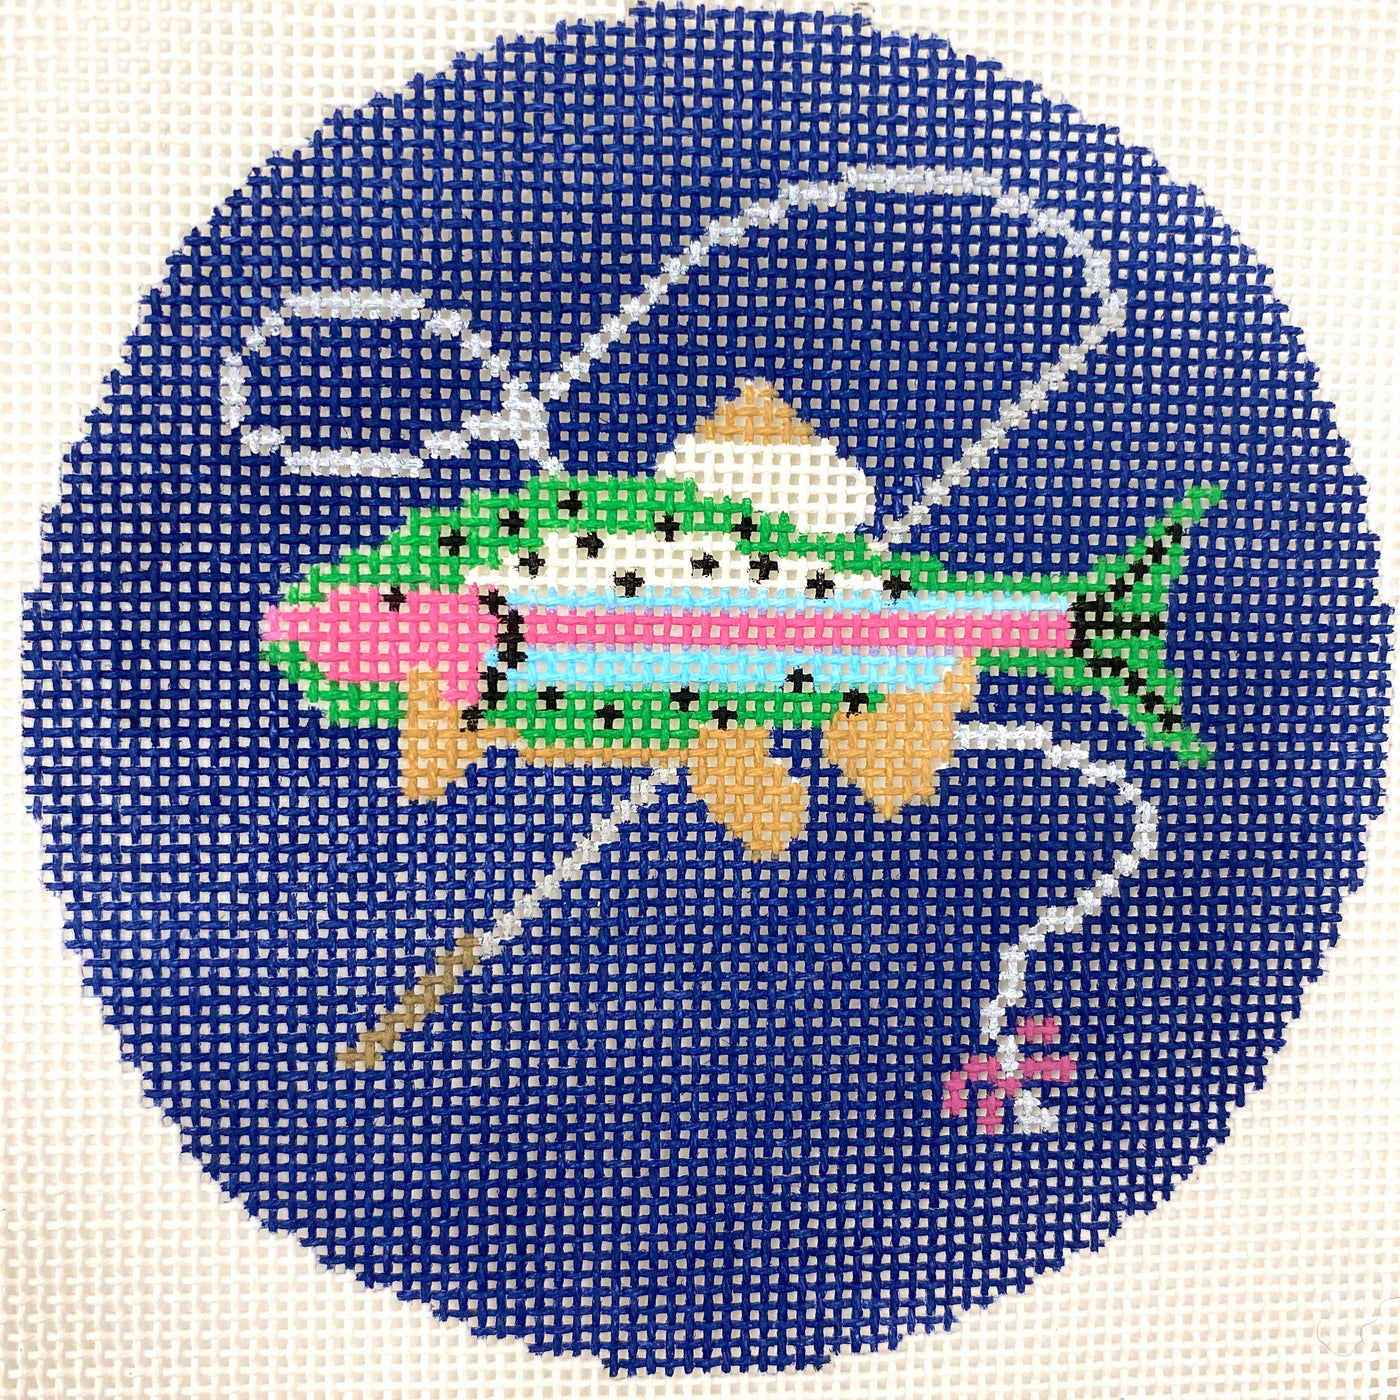 Fish with Rod on Blue Ornament Needlepoint Canvas